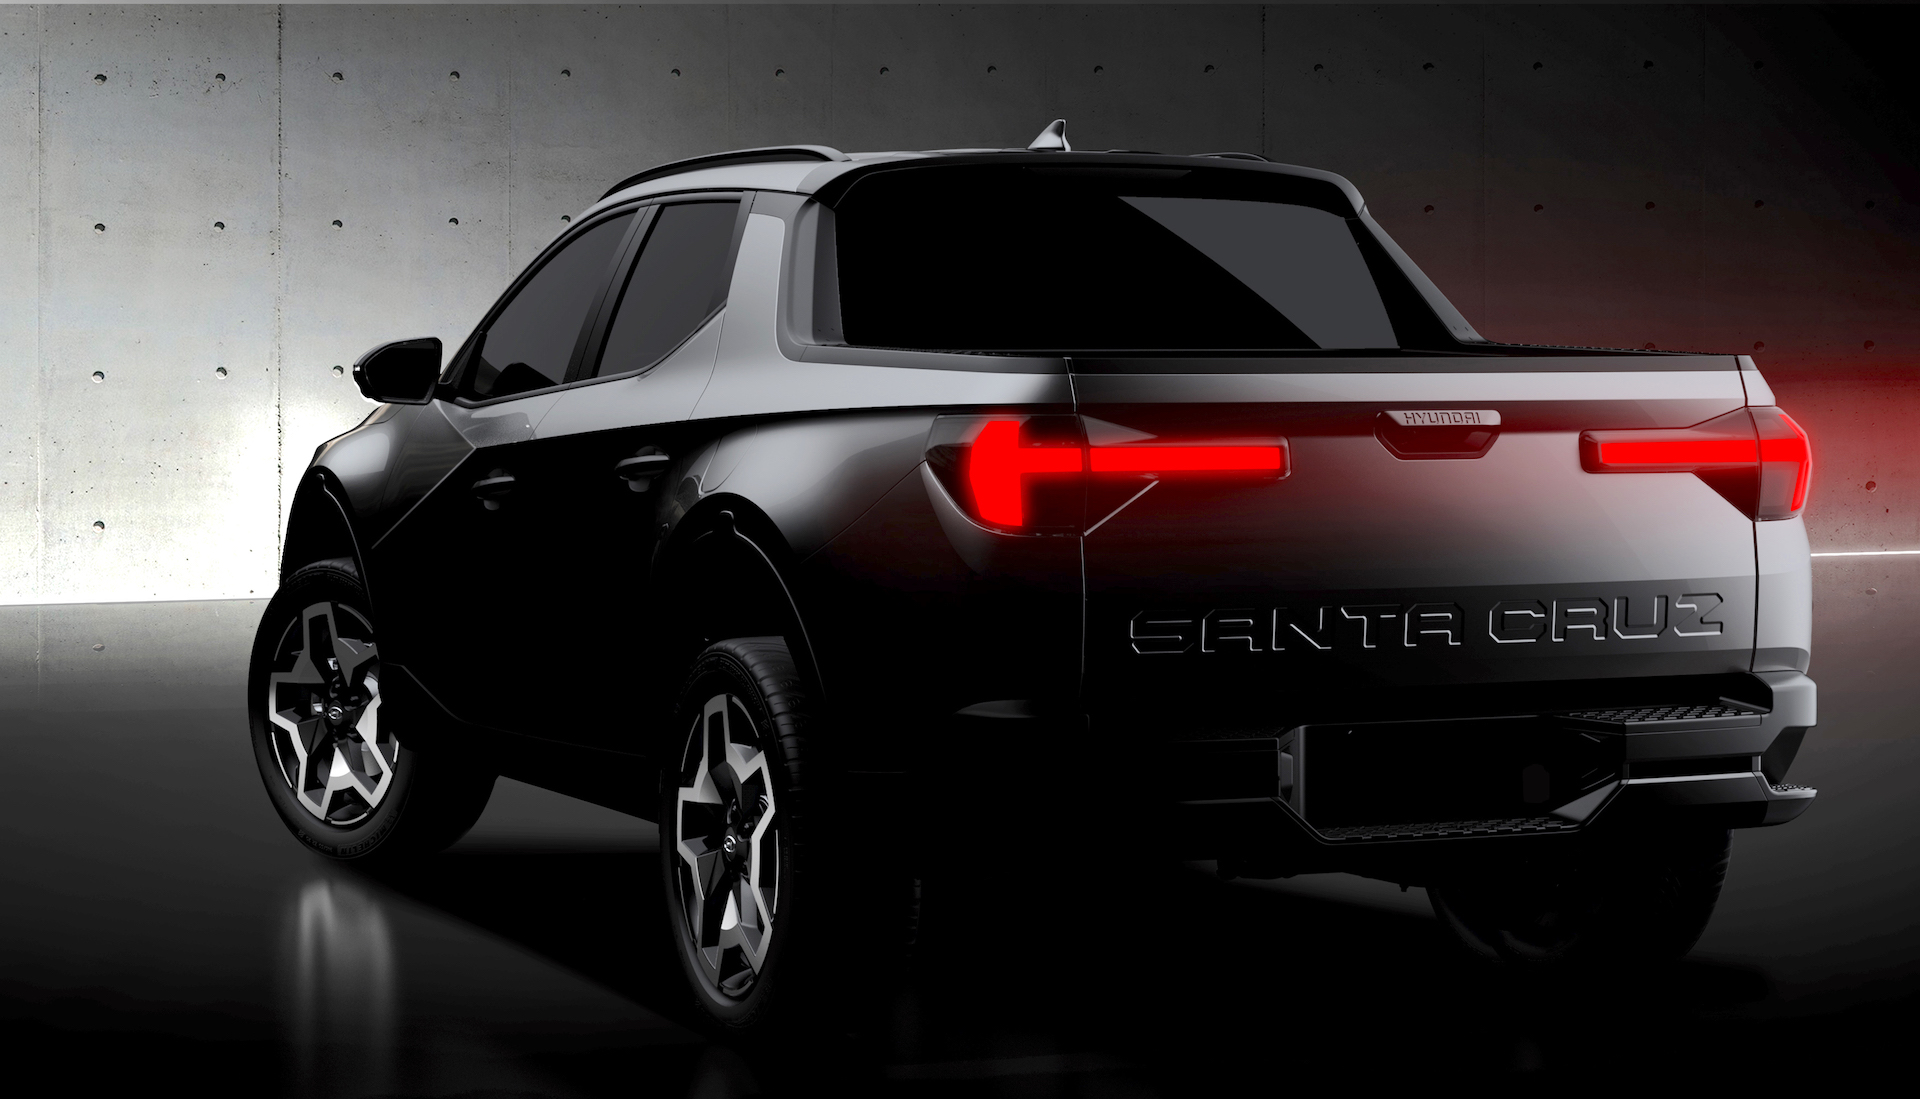 2022 Hyundai Santa Cruz Teased Is This The Best Looking Compact Truck You Can Buy Carscoops